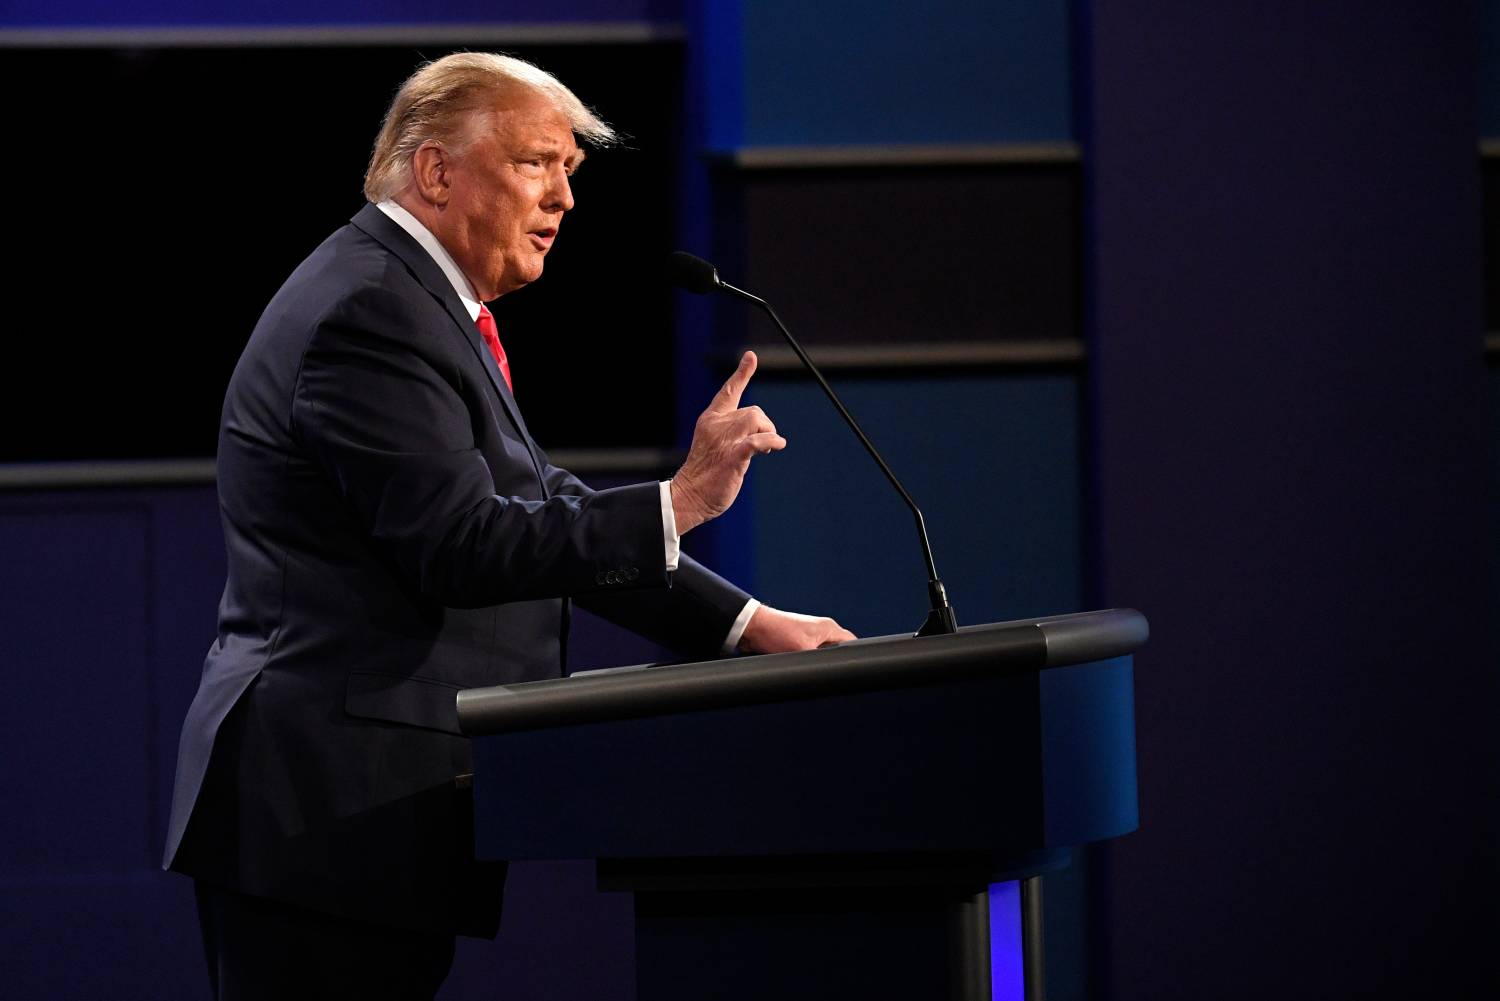 President Donald Trump answers a question at the final debate held in the Curb Event Center at Belmont University on Thursday, Oct. 22, 2020, in Nashville, Tenn.Done An55681